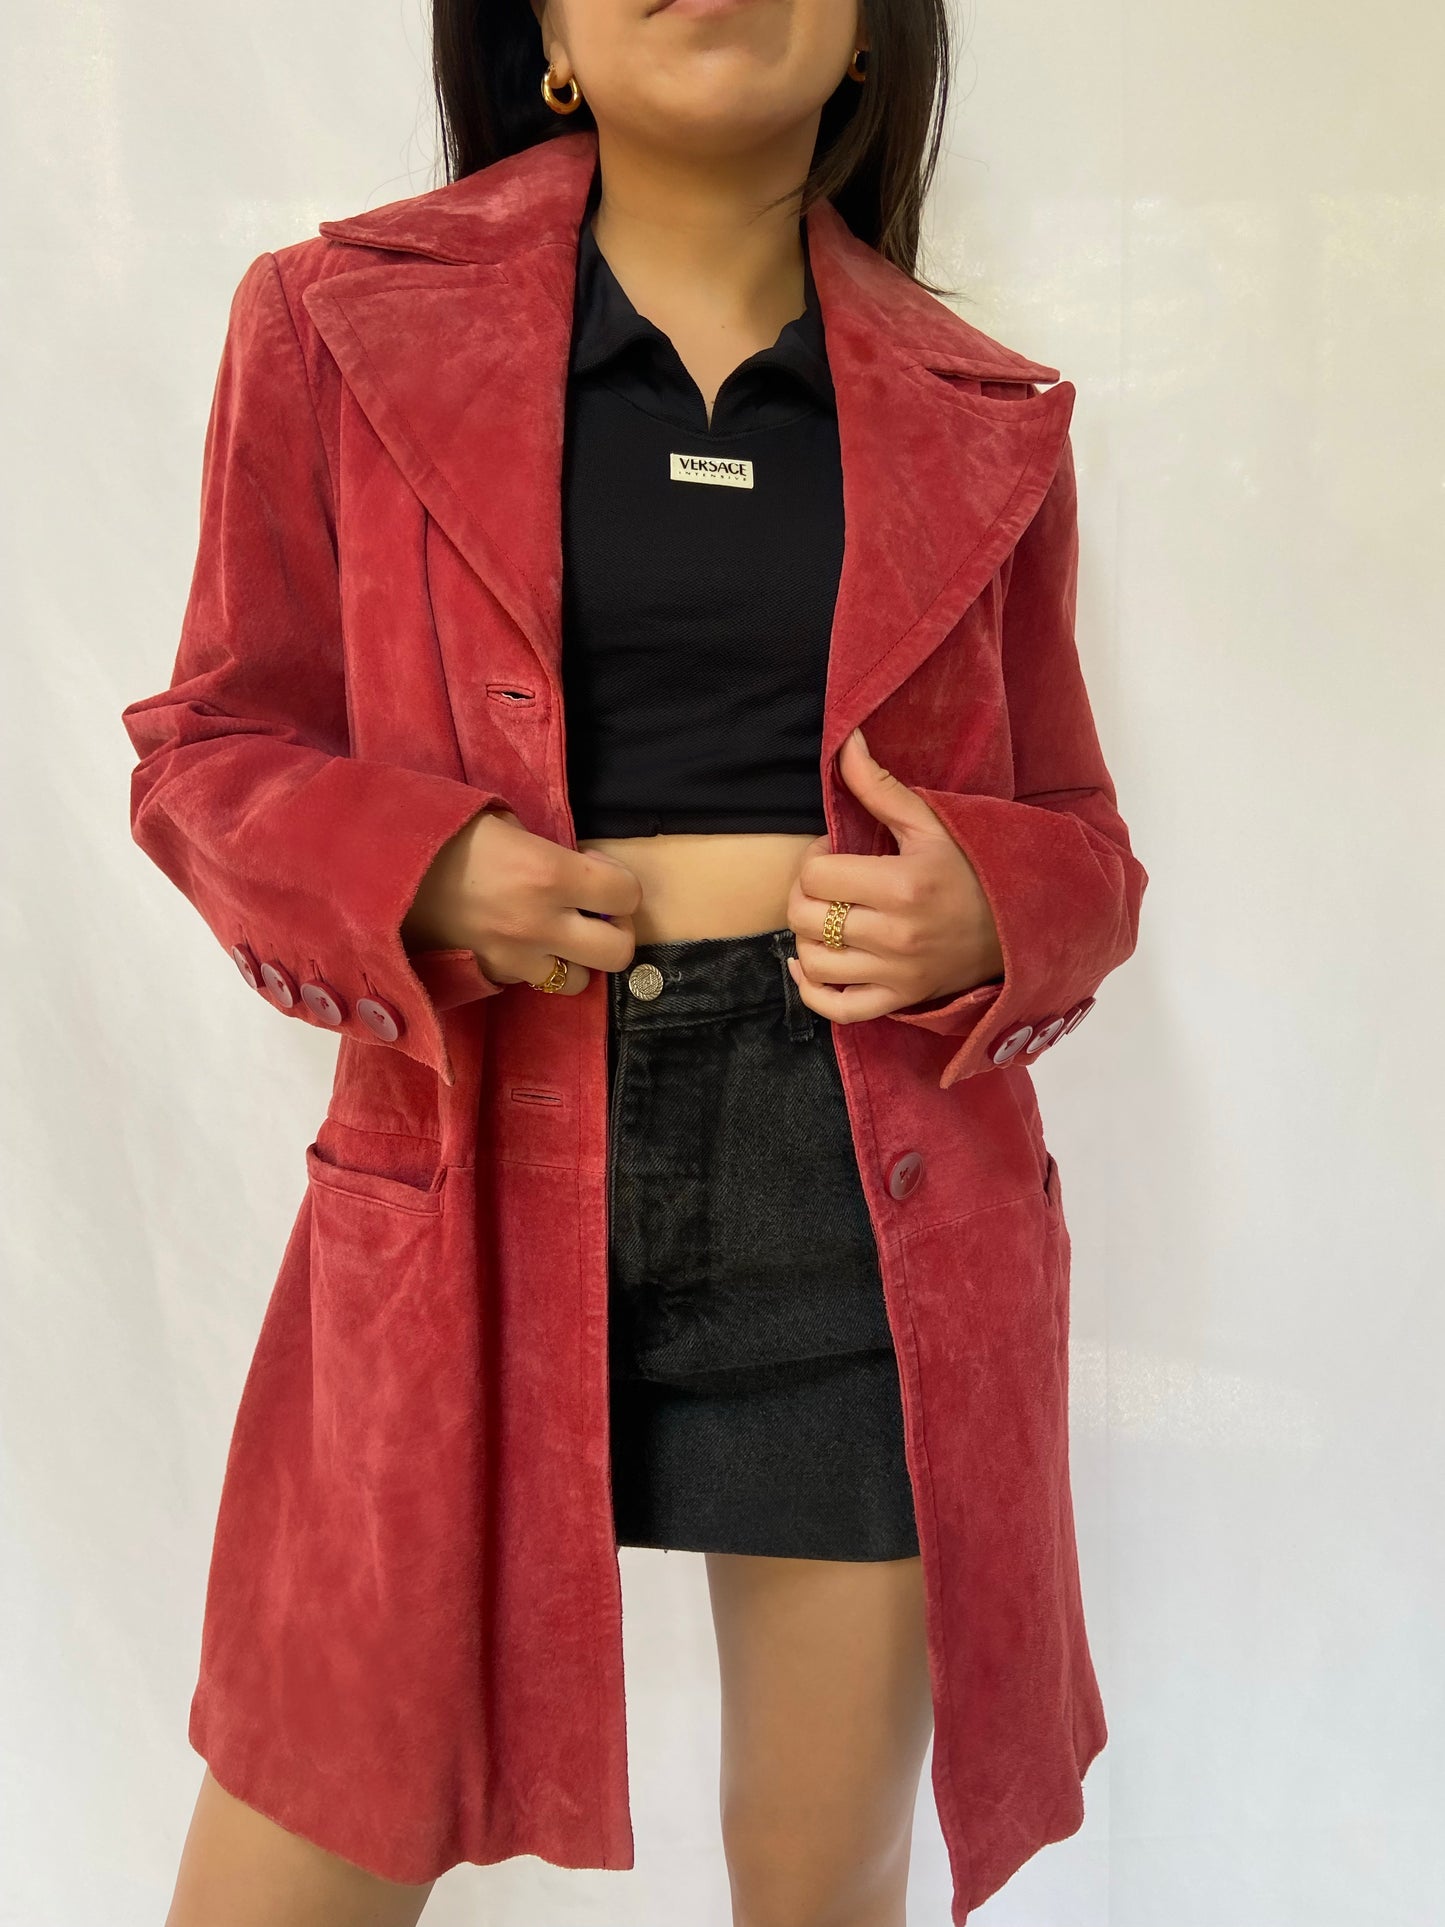 Red Suede Newport News Jacket - M/L